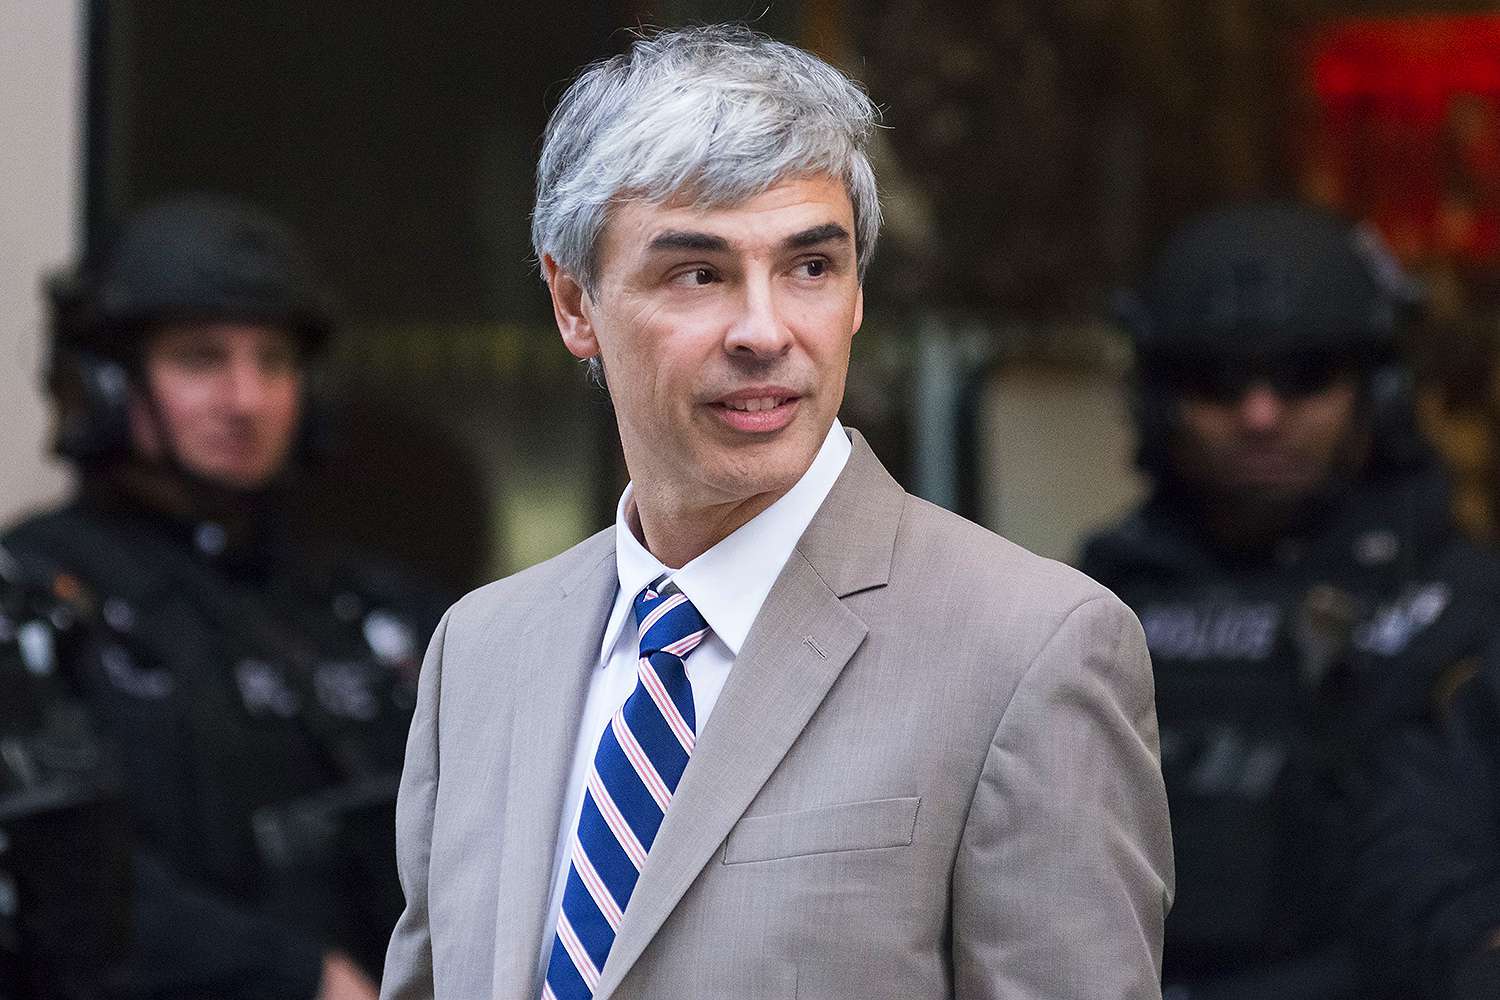 Larry Page Brought Son to New Zealand for Medical Emergency | PEOPLE.com